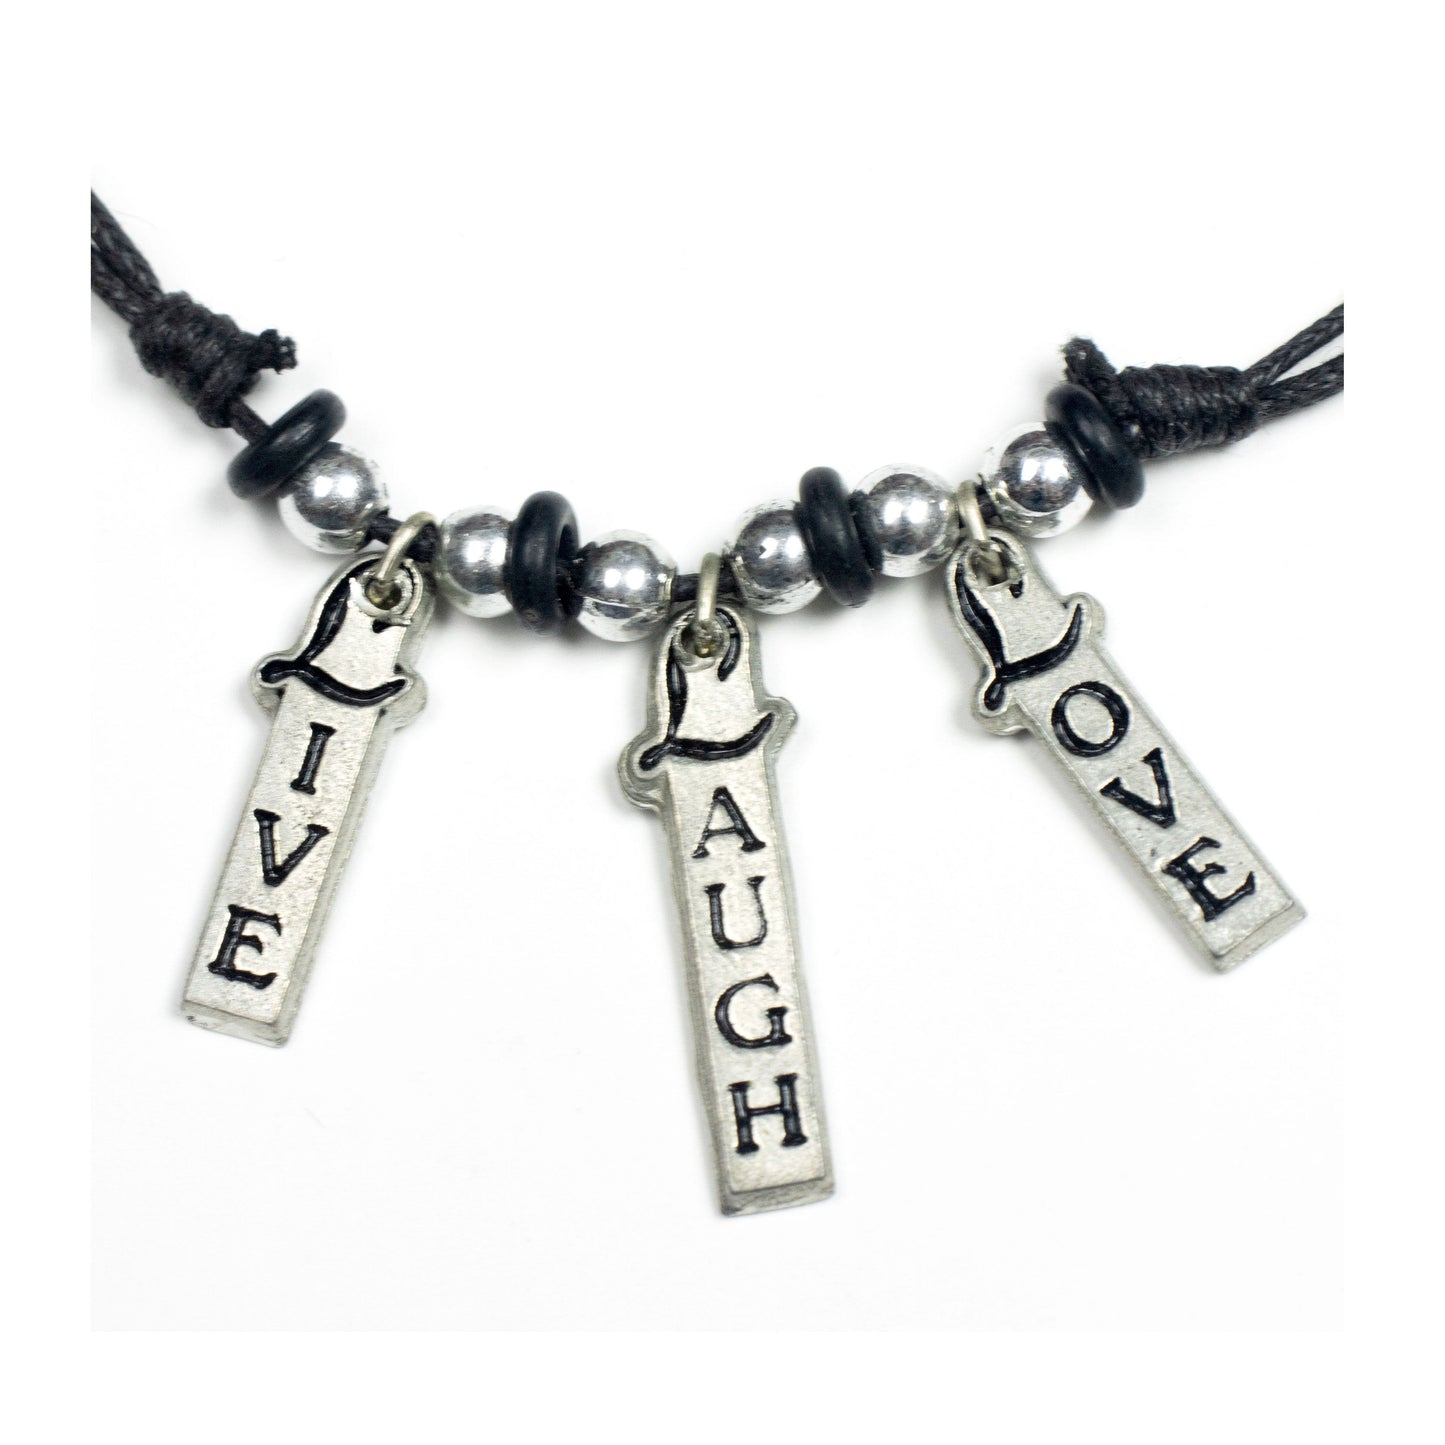 Give Laugh Love® Three Pillars Roped Necklace